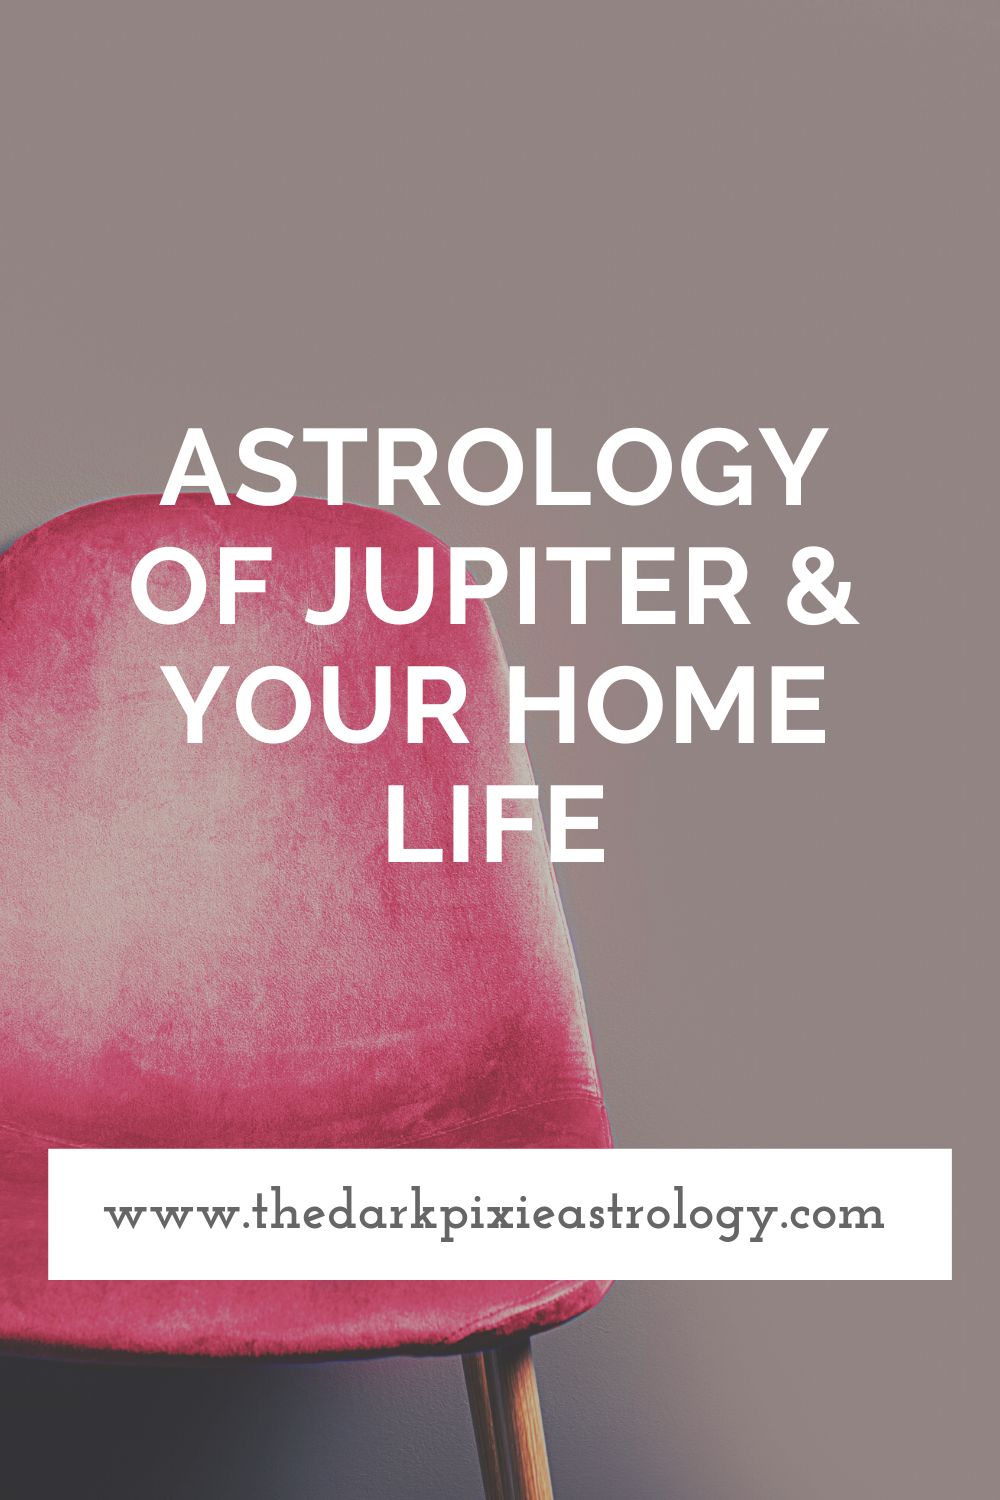 Astrology of Jupiter & Your Home Life - The Dark Pixie Astrology